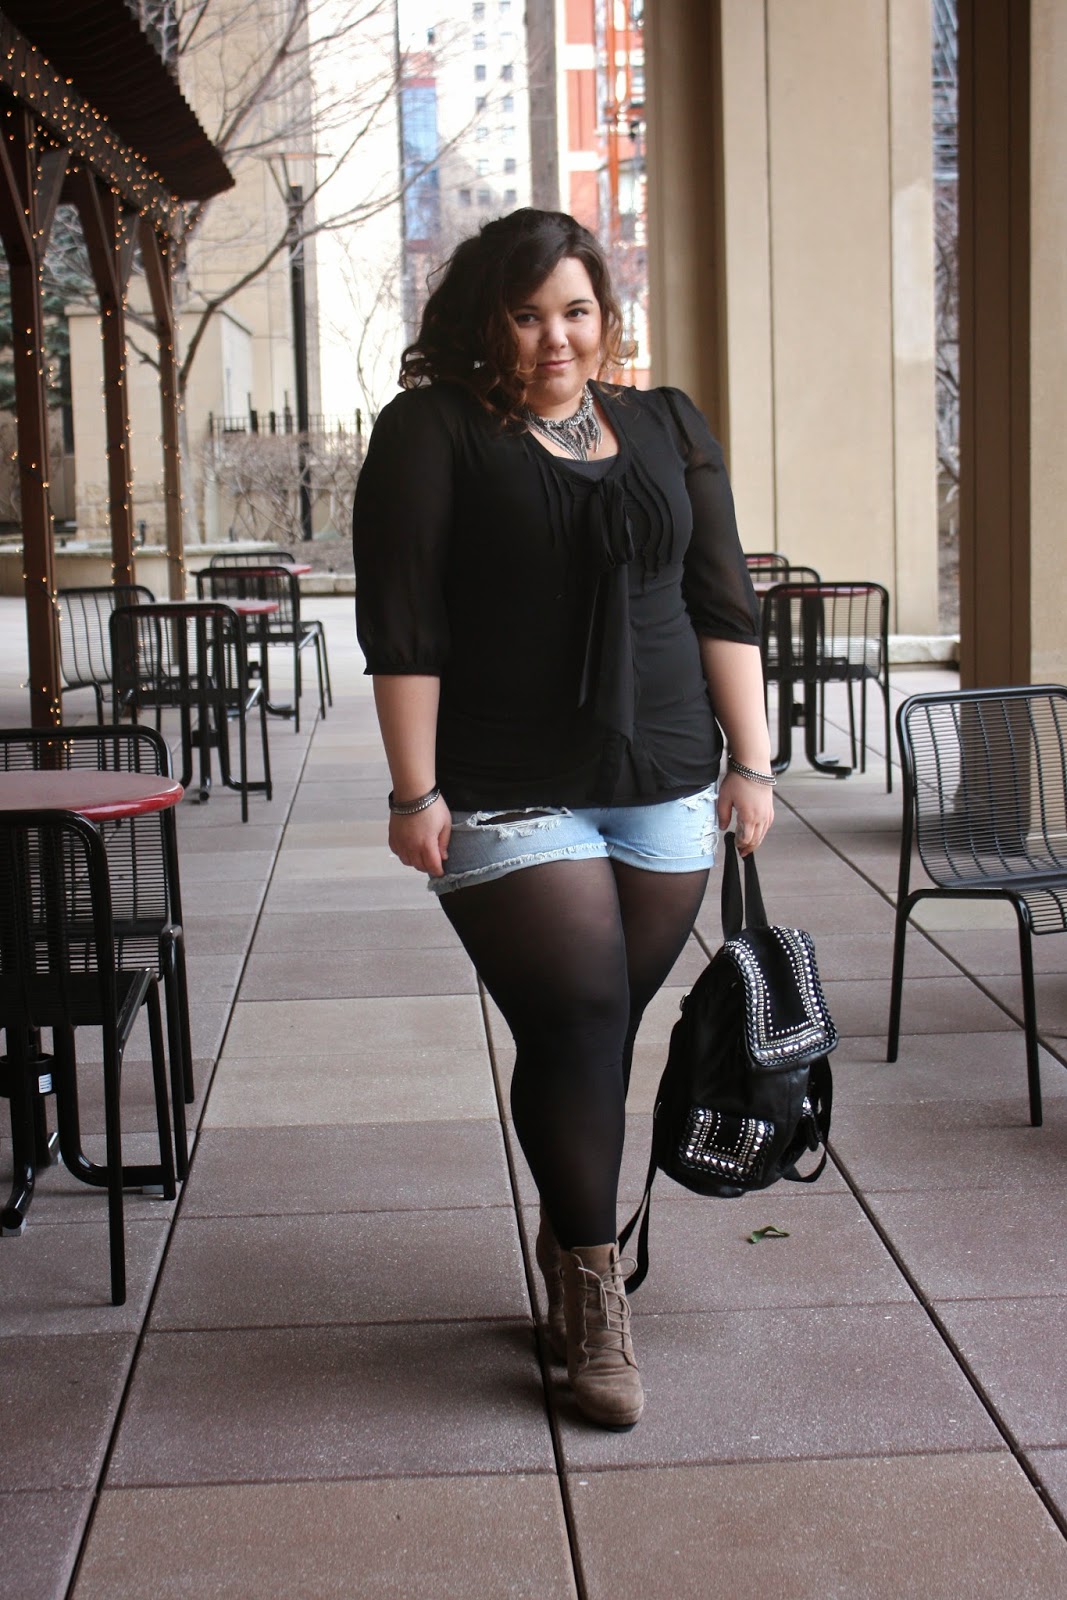 ecote boots, urban outfitters, chiffon blouse, chain necklace, blonde, curly hair, ombre, pony tail, ankle boots, studded backpack, shorts, plus size fashion blogger, natalie craig, natalie in the city, chicago blogger network, chicago fashion